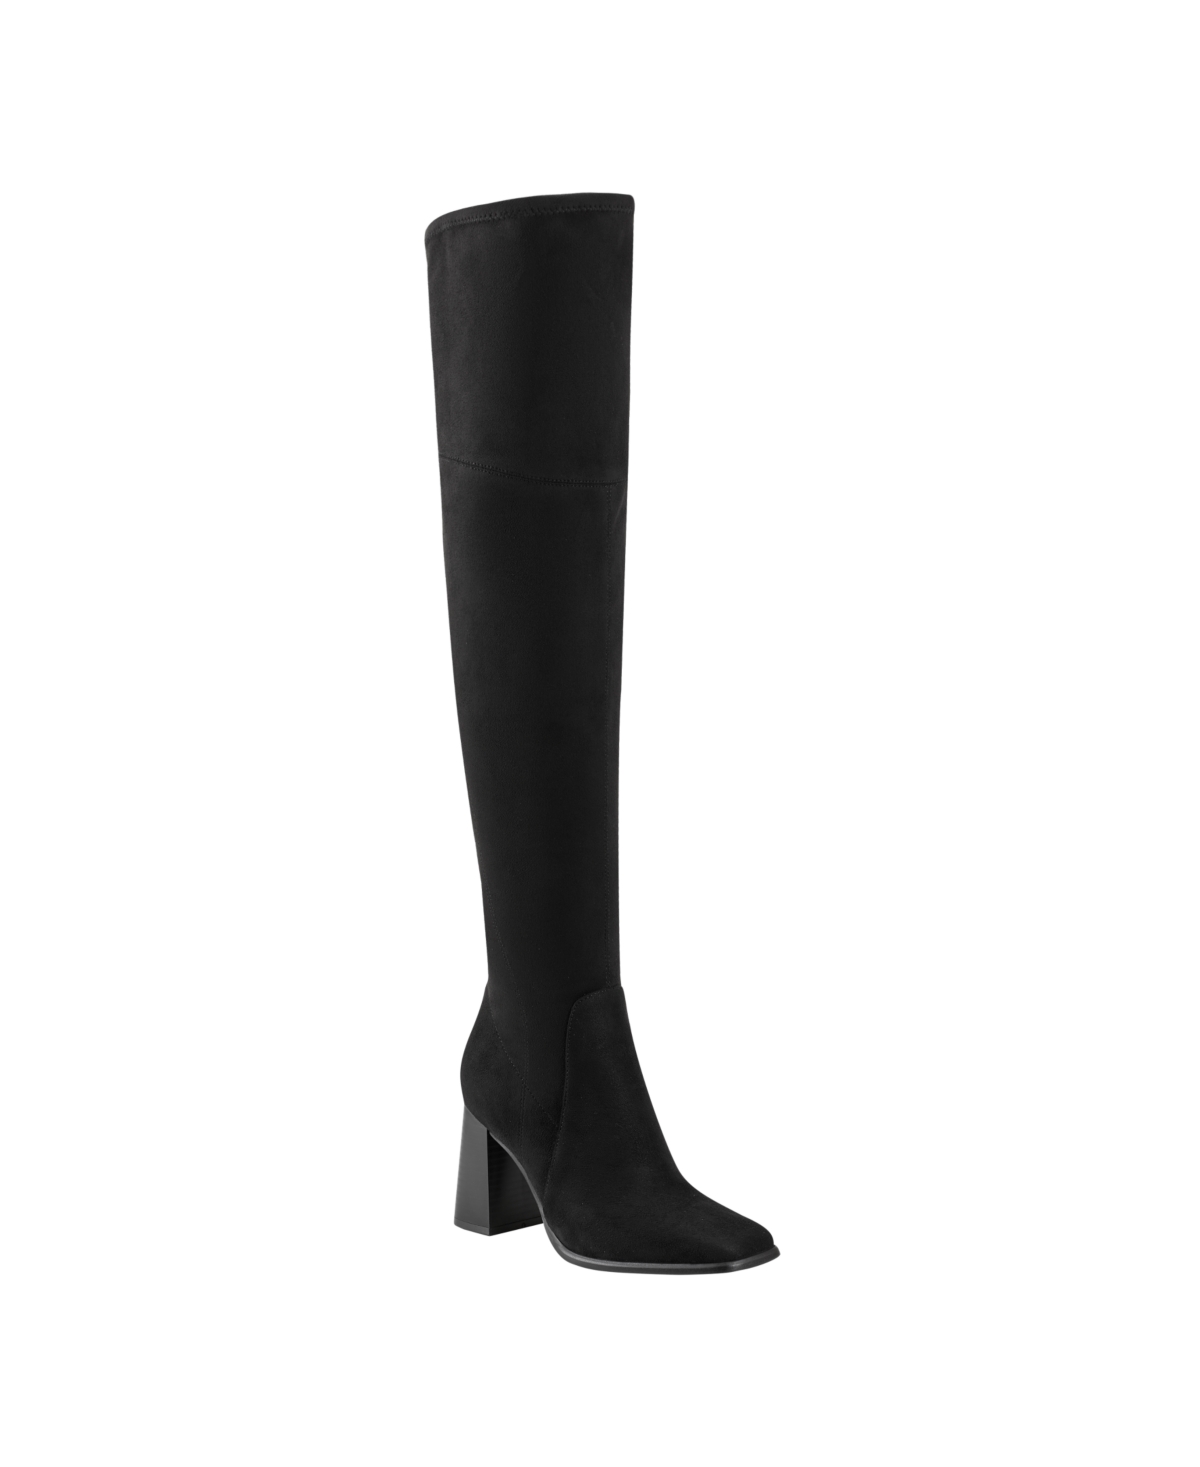 Women's Denki Over The Knee Square Toe Boots - Black Suede